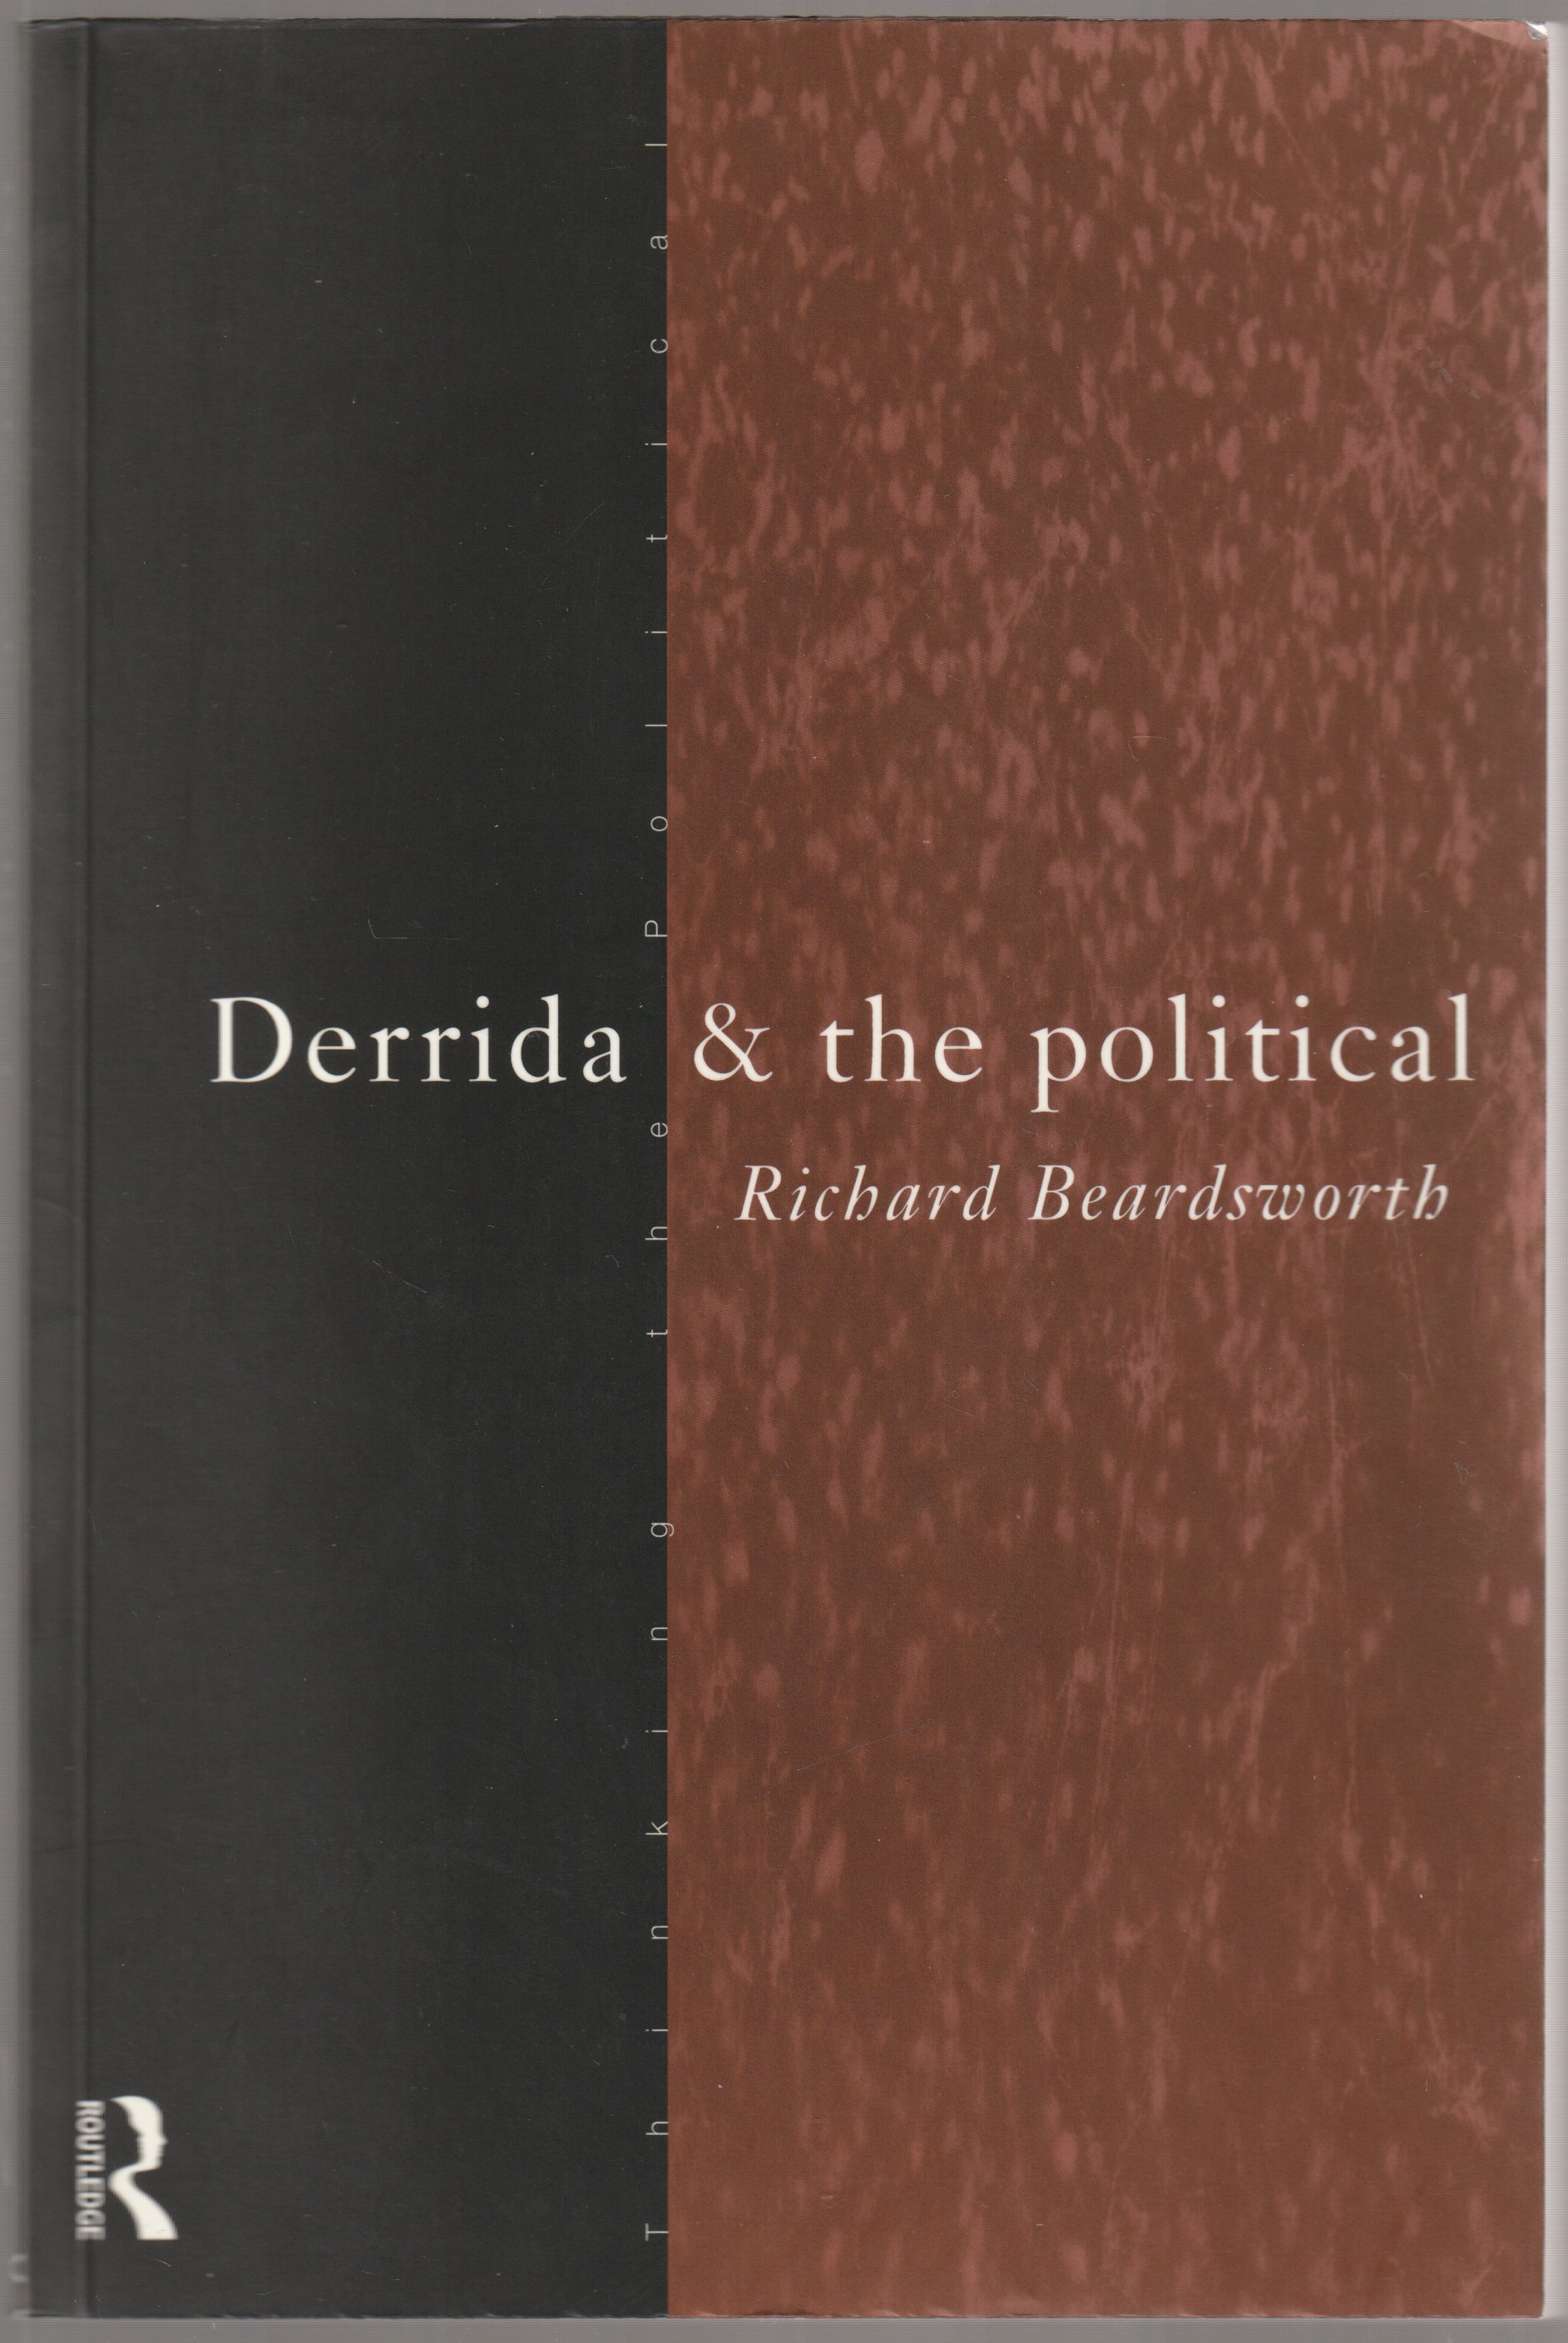 Derrida and the political.